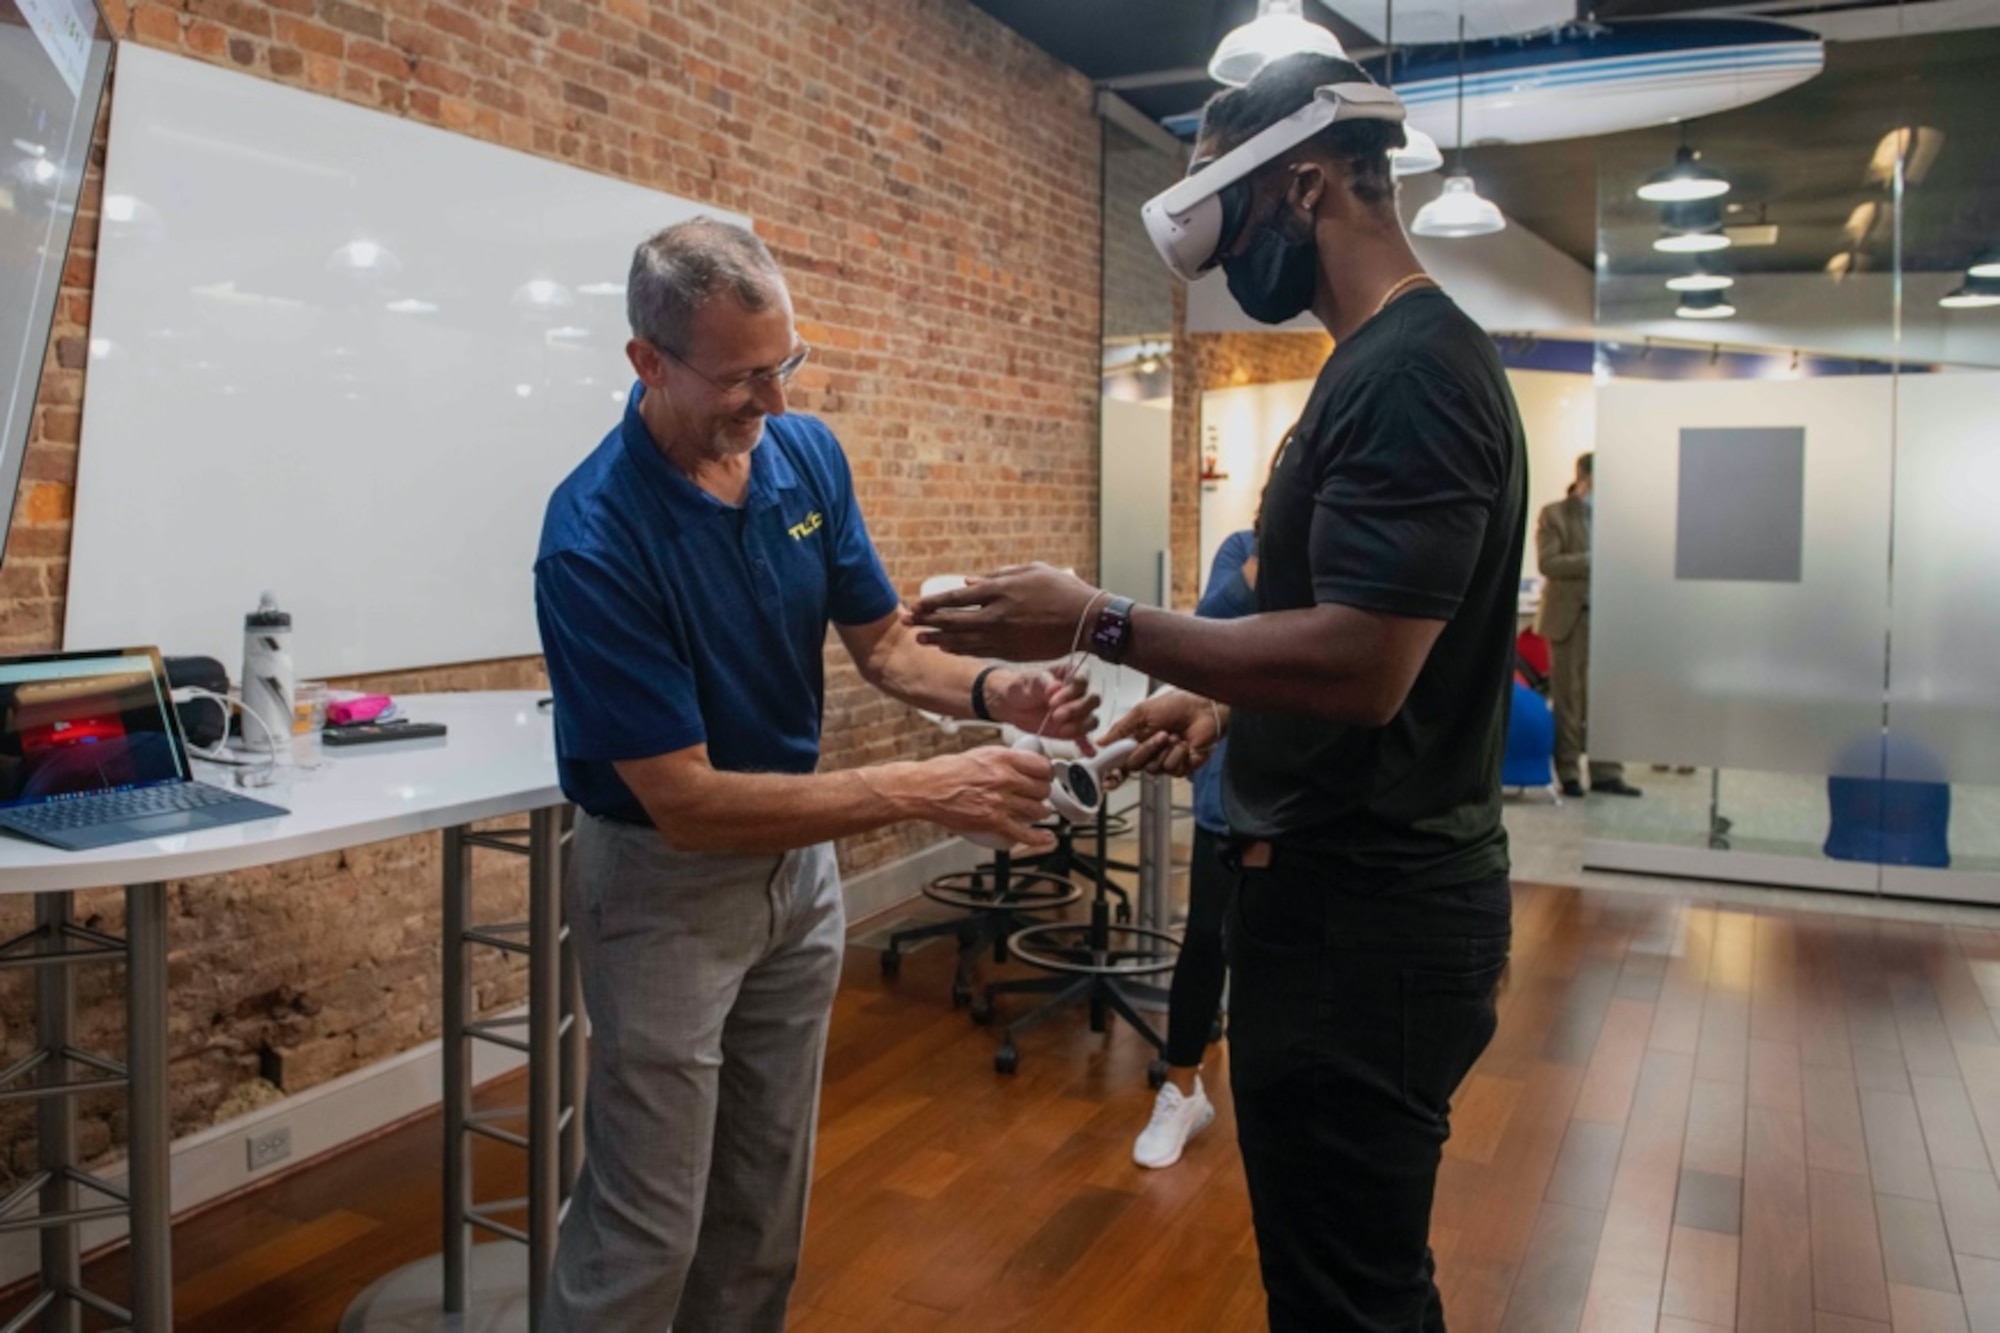 Douglas McCarty, an instructional systems developer from the Air University Teaching and Learning Center, helps an event attendee try out a virtual reality headset during the MGMWERX AR/VR iExpo in Montgomery, Alabama, Nov. 9, 2021. MGMWERX works alongside Air University to promote innovation and collaboration in unique ways through experimentation with emerging tools, processes, and methods to get innovation to the warfighter faster. (U.S. Air Force photo by Staff Sgt. Lauren Silverthorne)